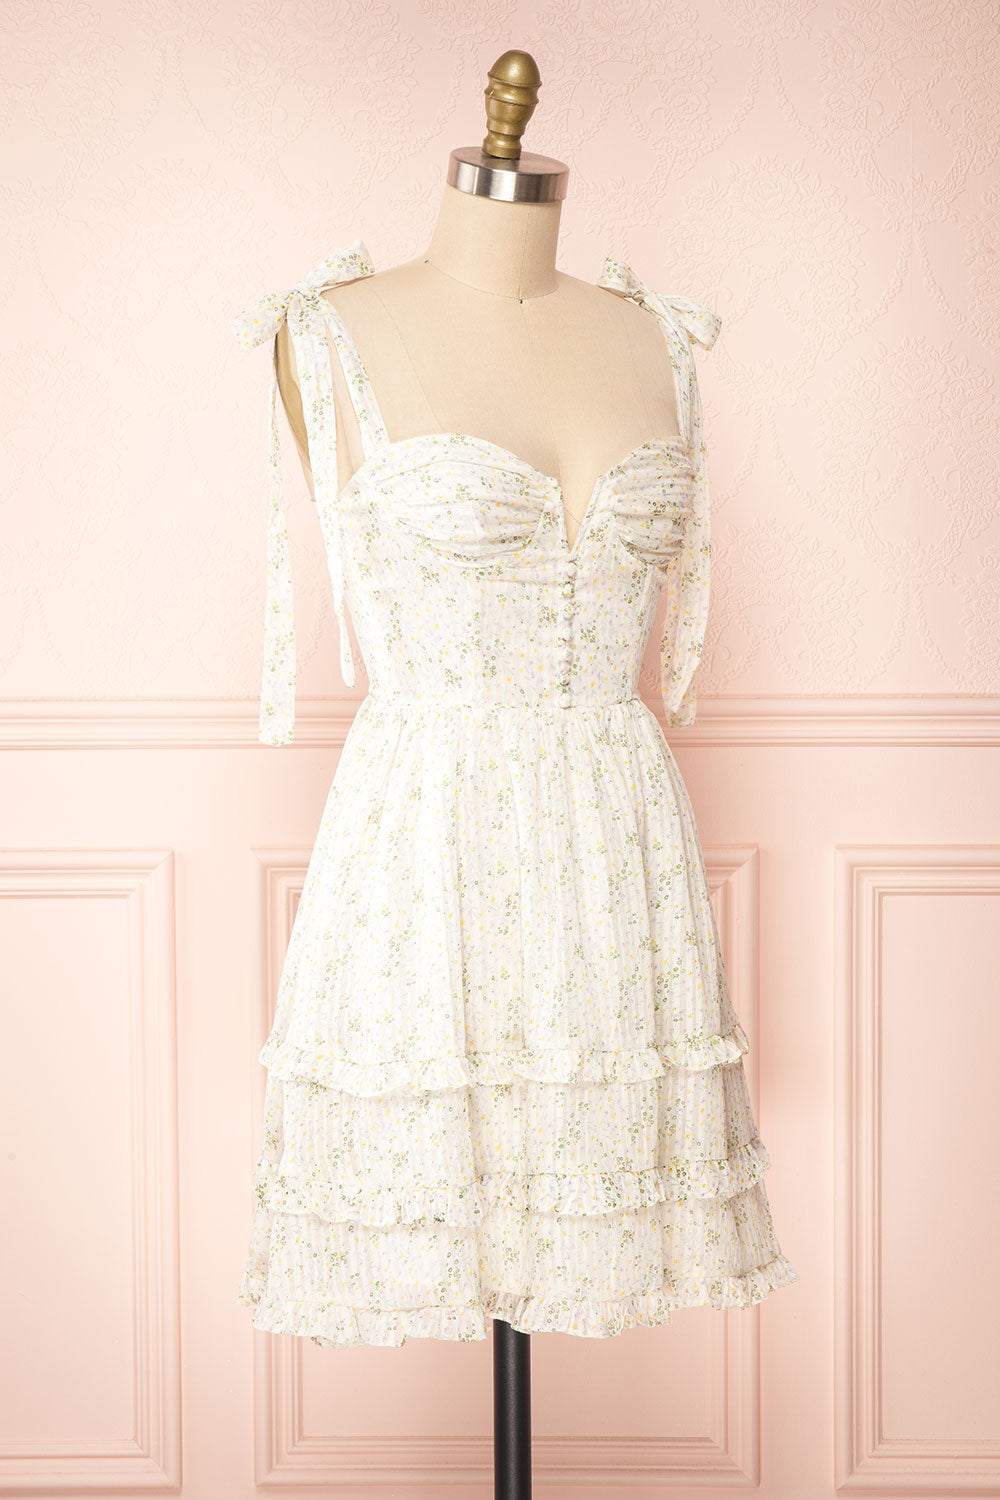 Narnia Short Floral Dress w/ Sweetheart Neckline | Boutique 1861 side view